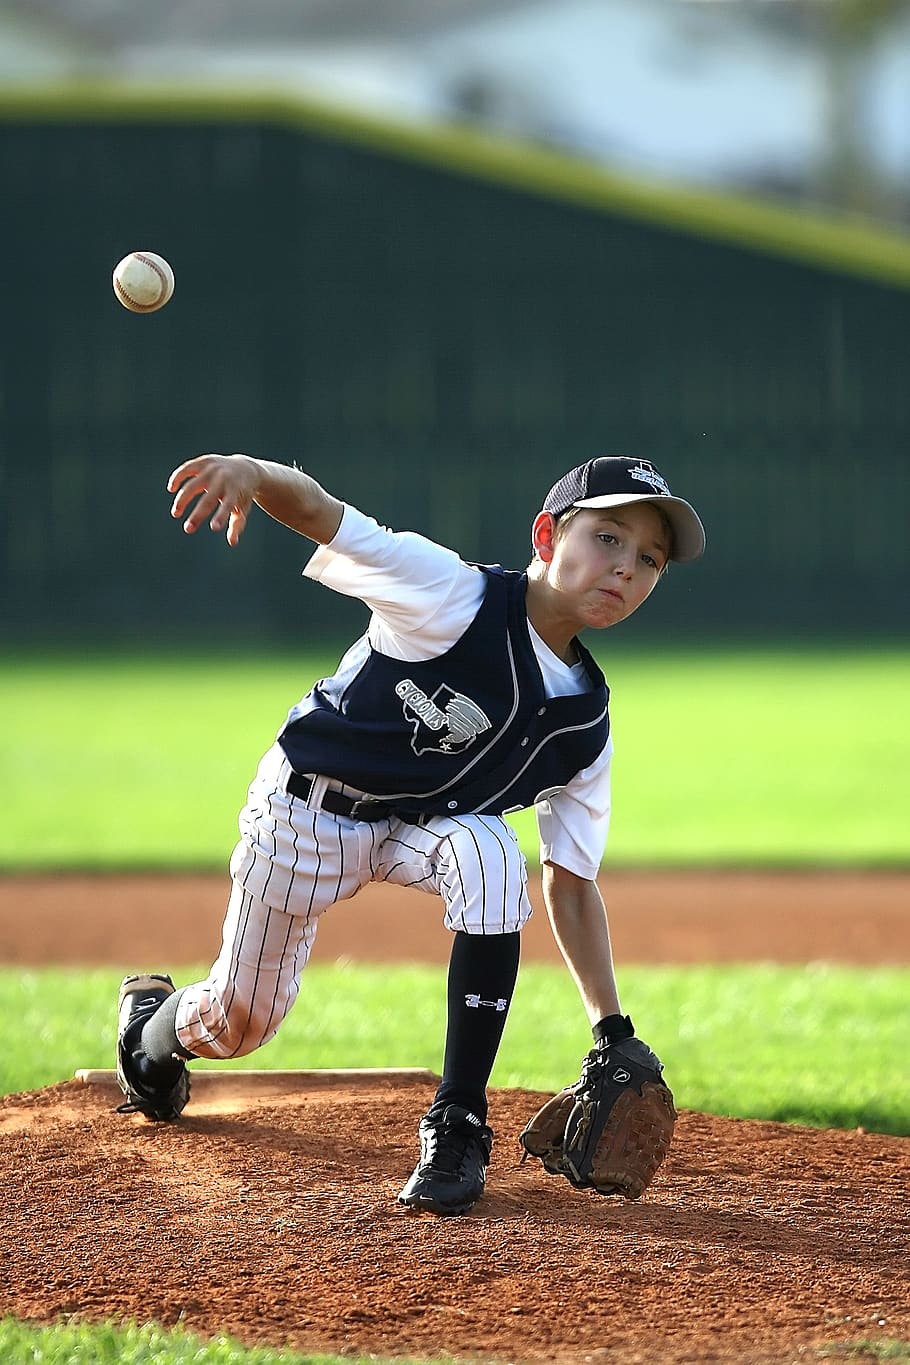 baseball, pitcher, ball, sport, athlete, game, competition, field, mound, player